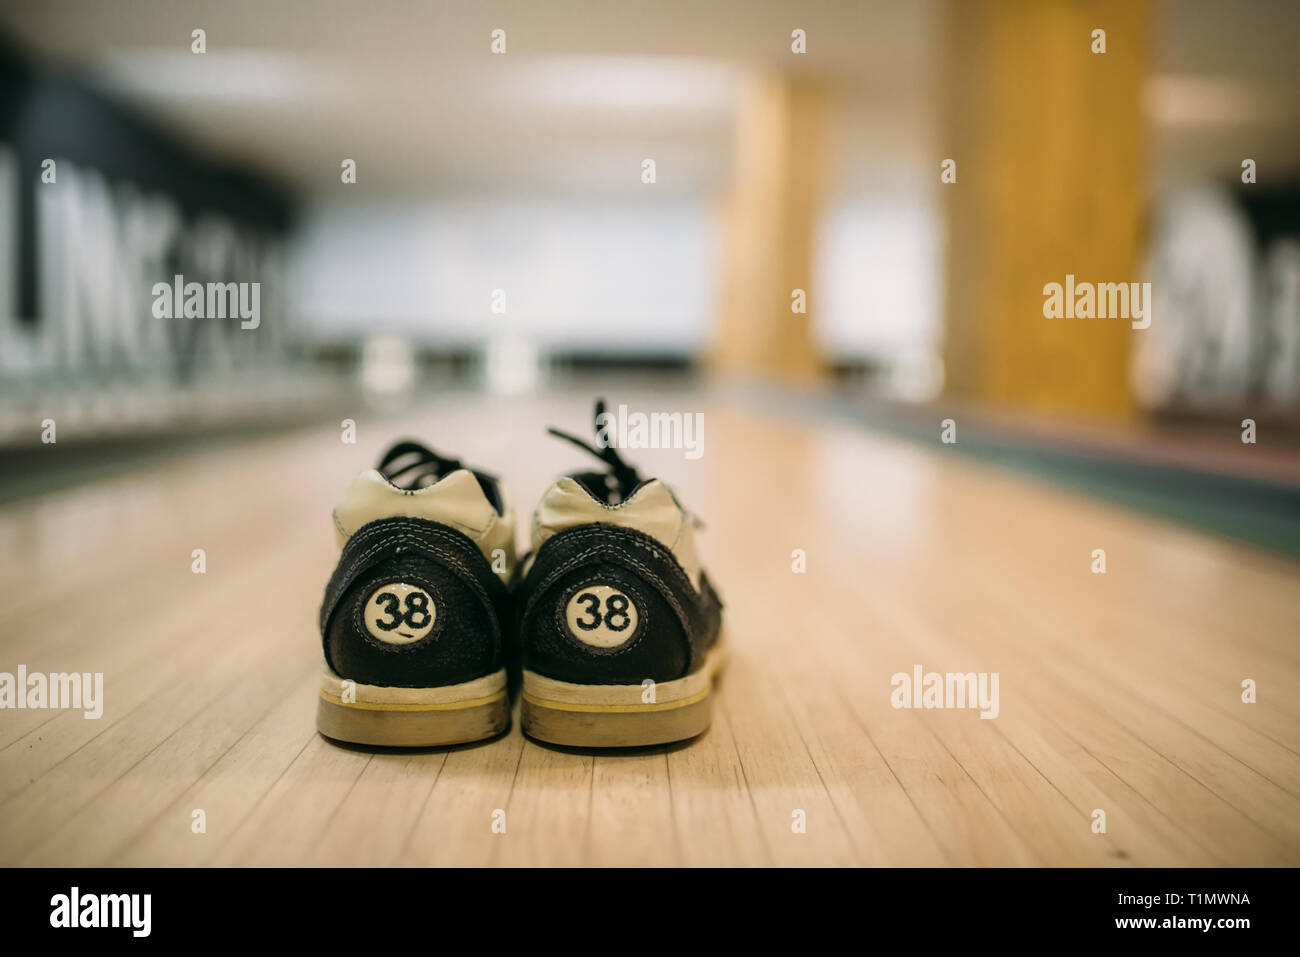 Bowling ball and house shoes on lane closeup view Stock Photo